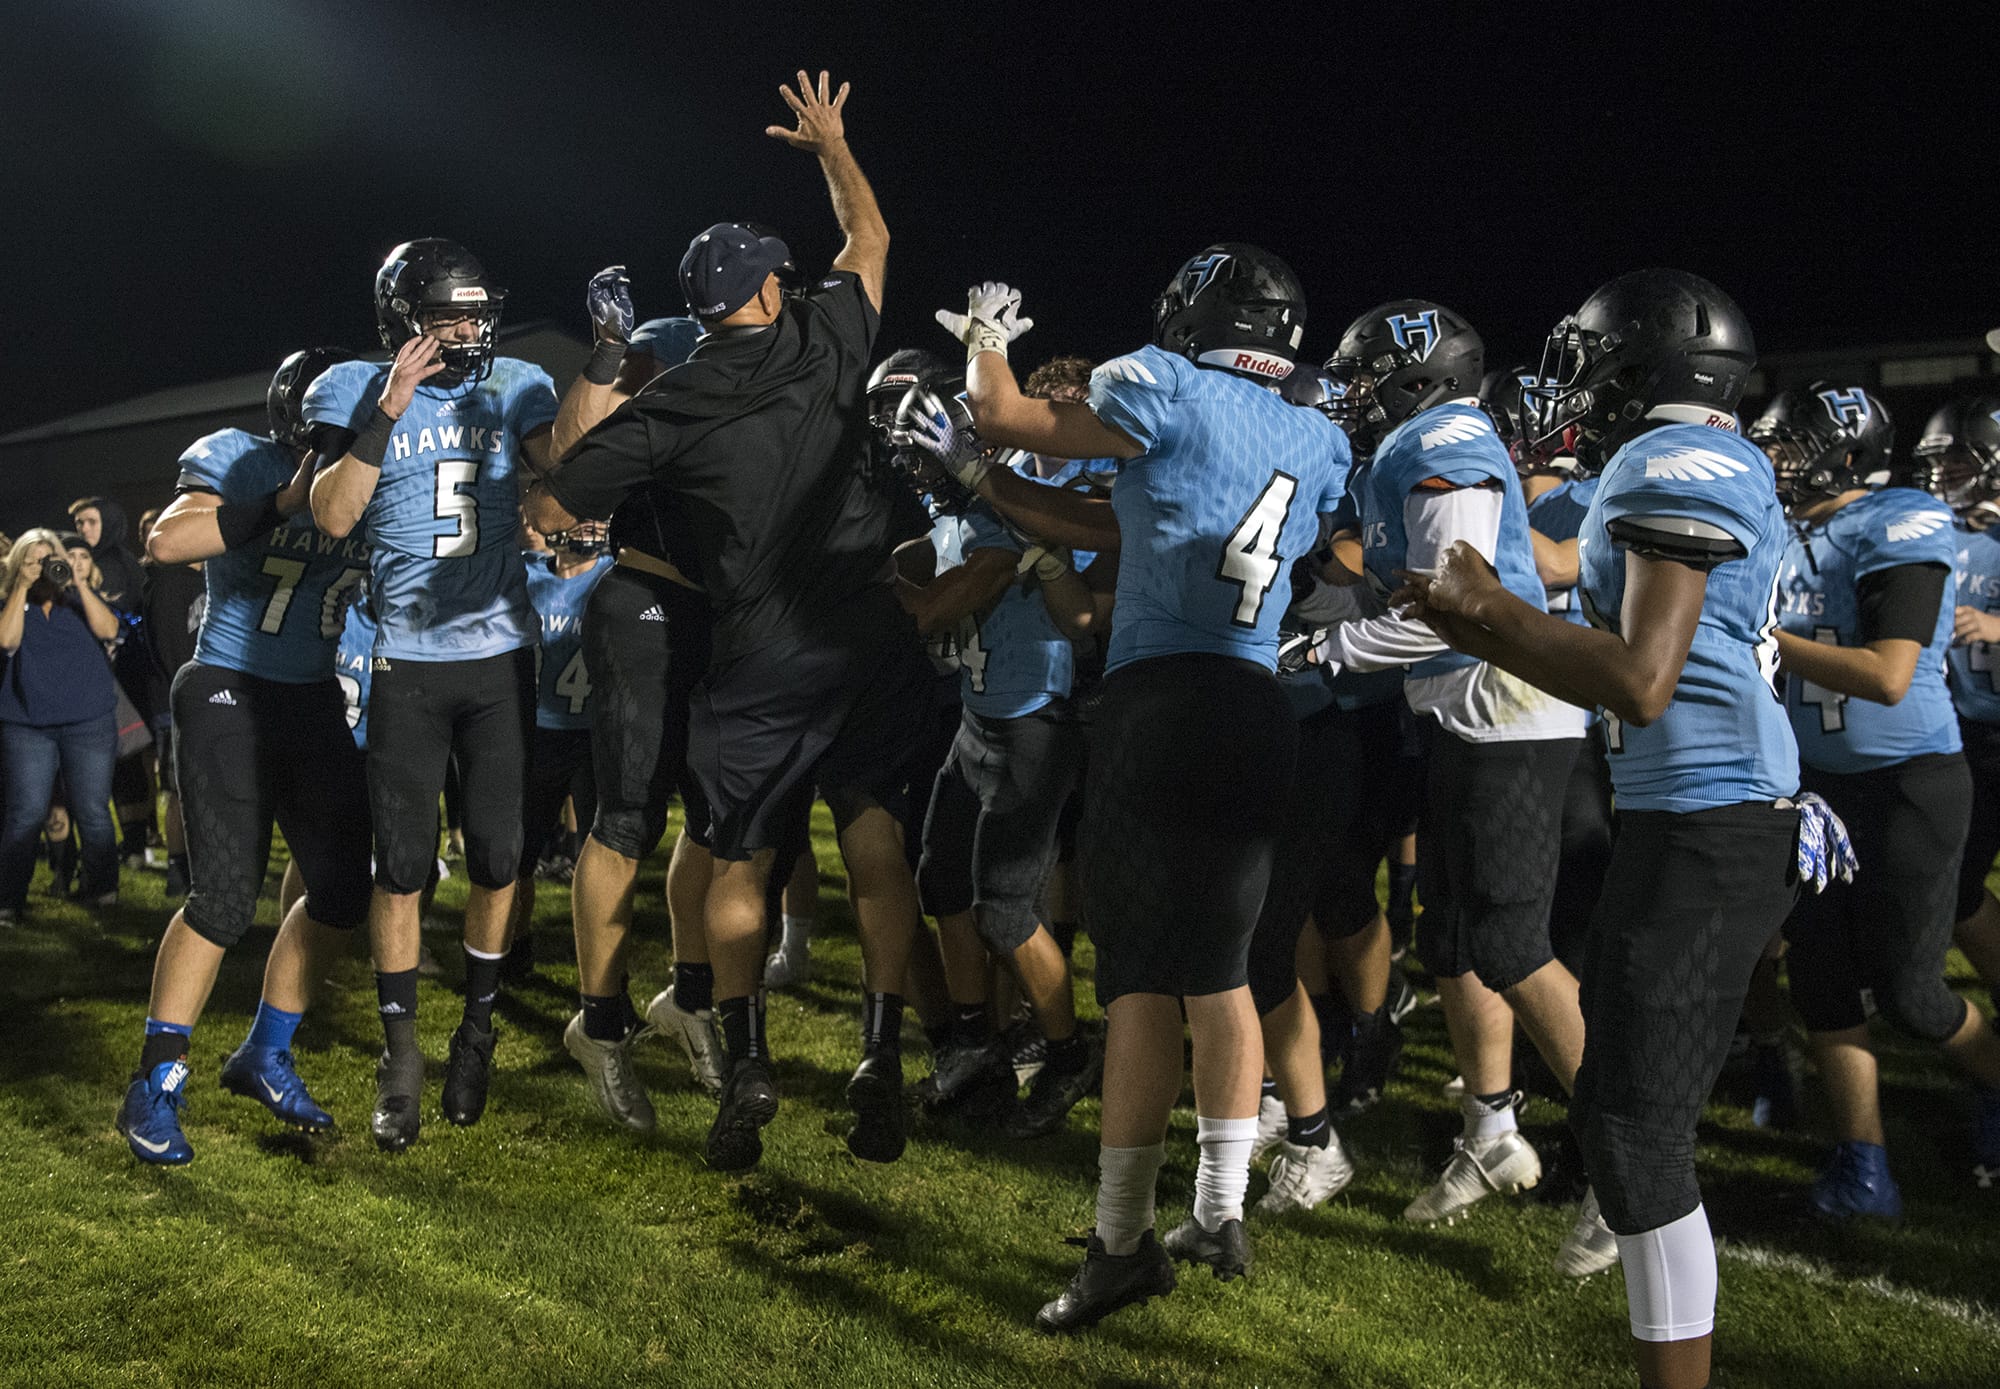 Hockinson coach Rick Steele celebrates the win over Woodland with his team after Friday night's game in Hockinson on Sept. 28, 2018. Hockinson won 42-27.